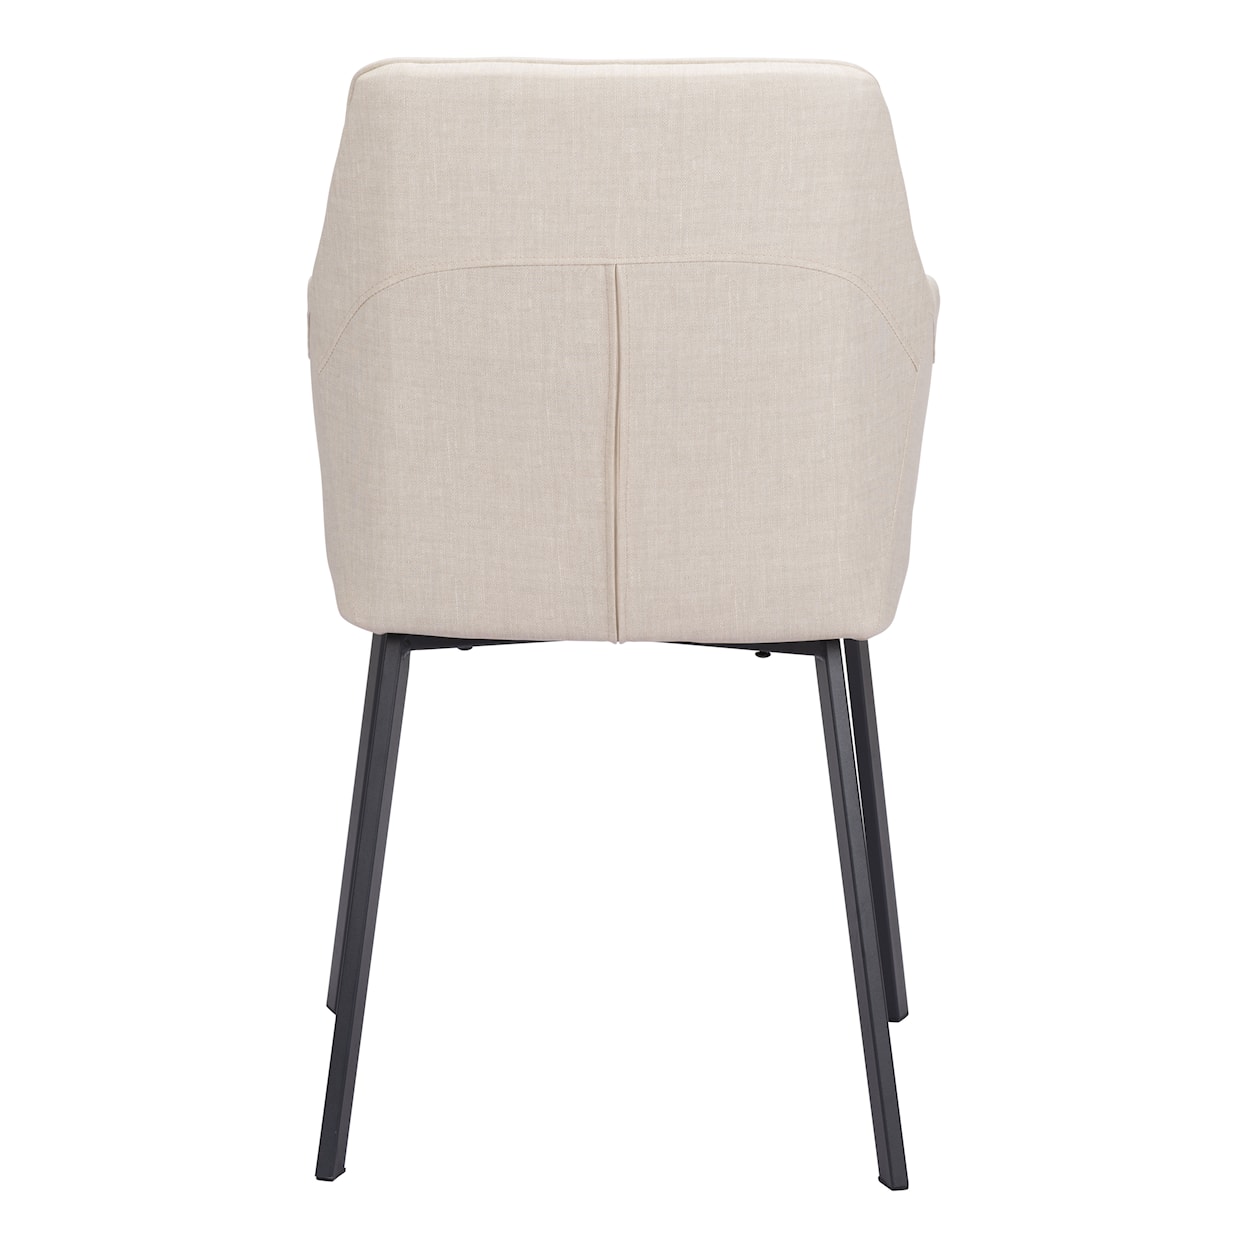 Zuo Adage Dining Chair